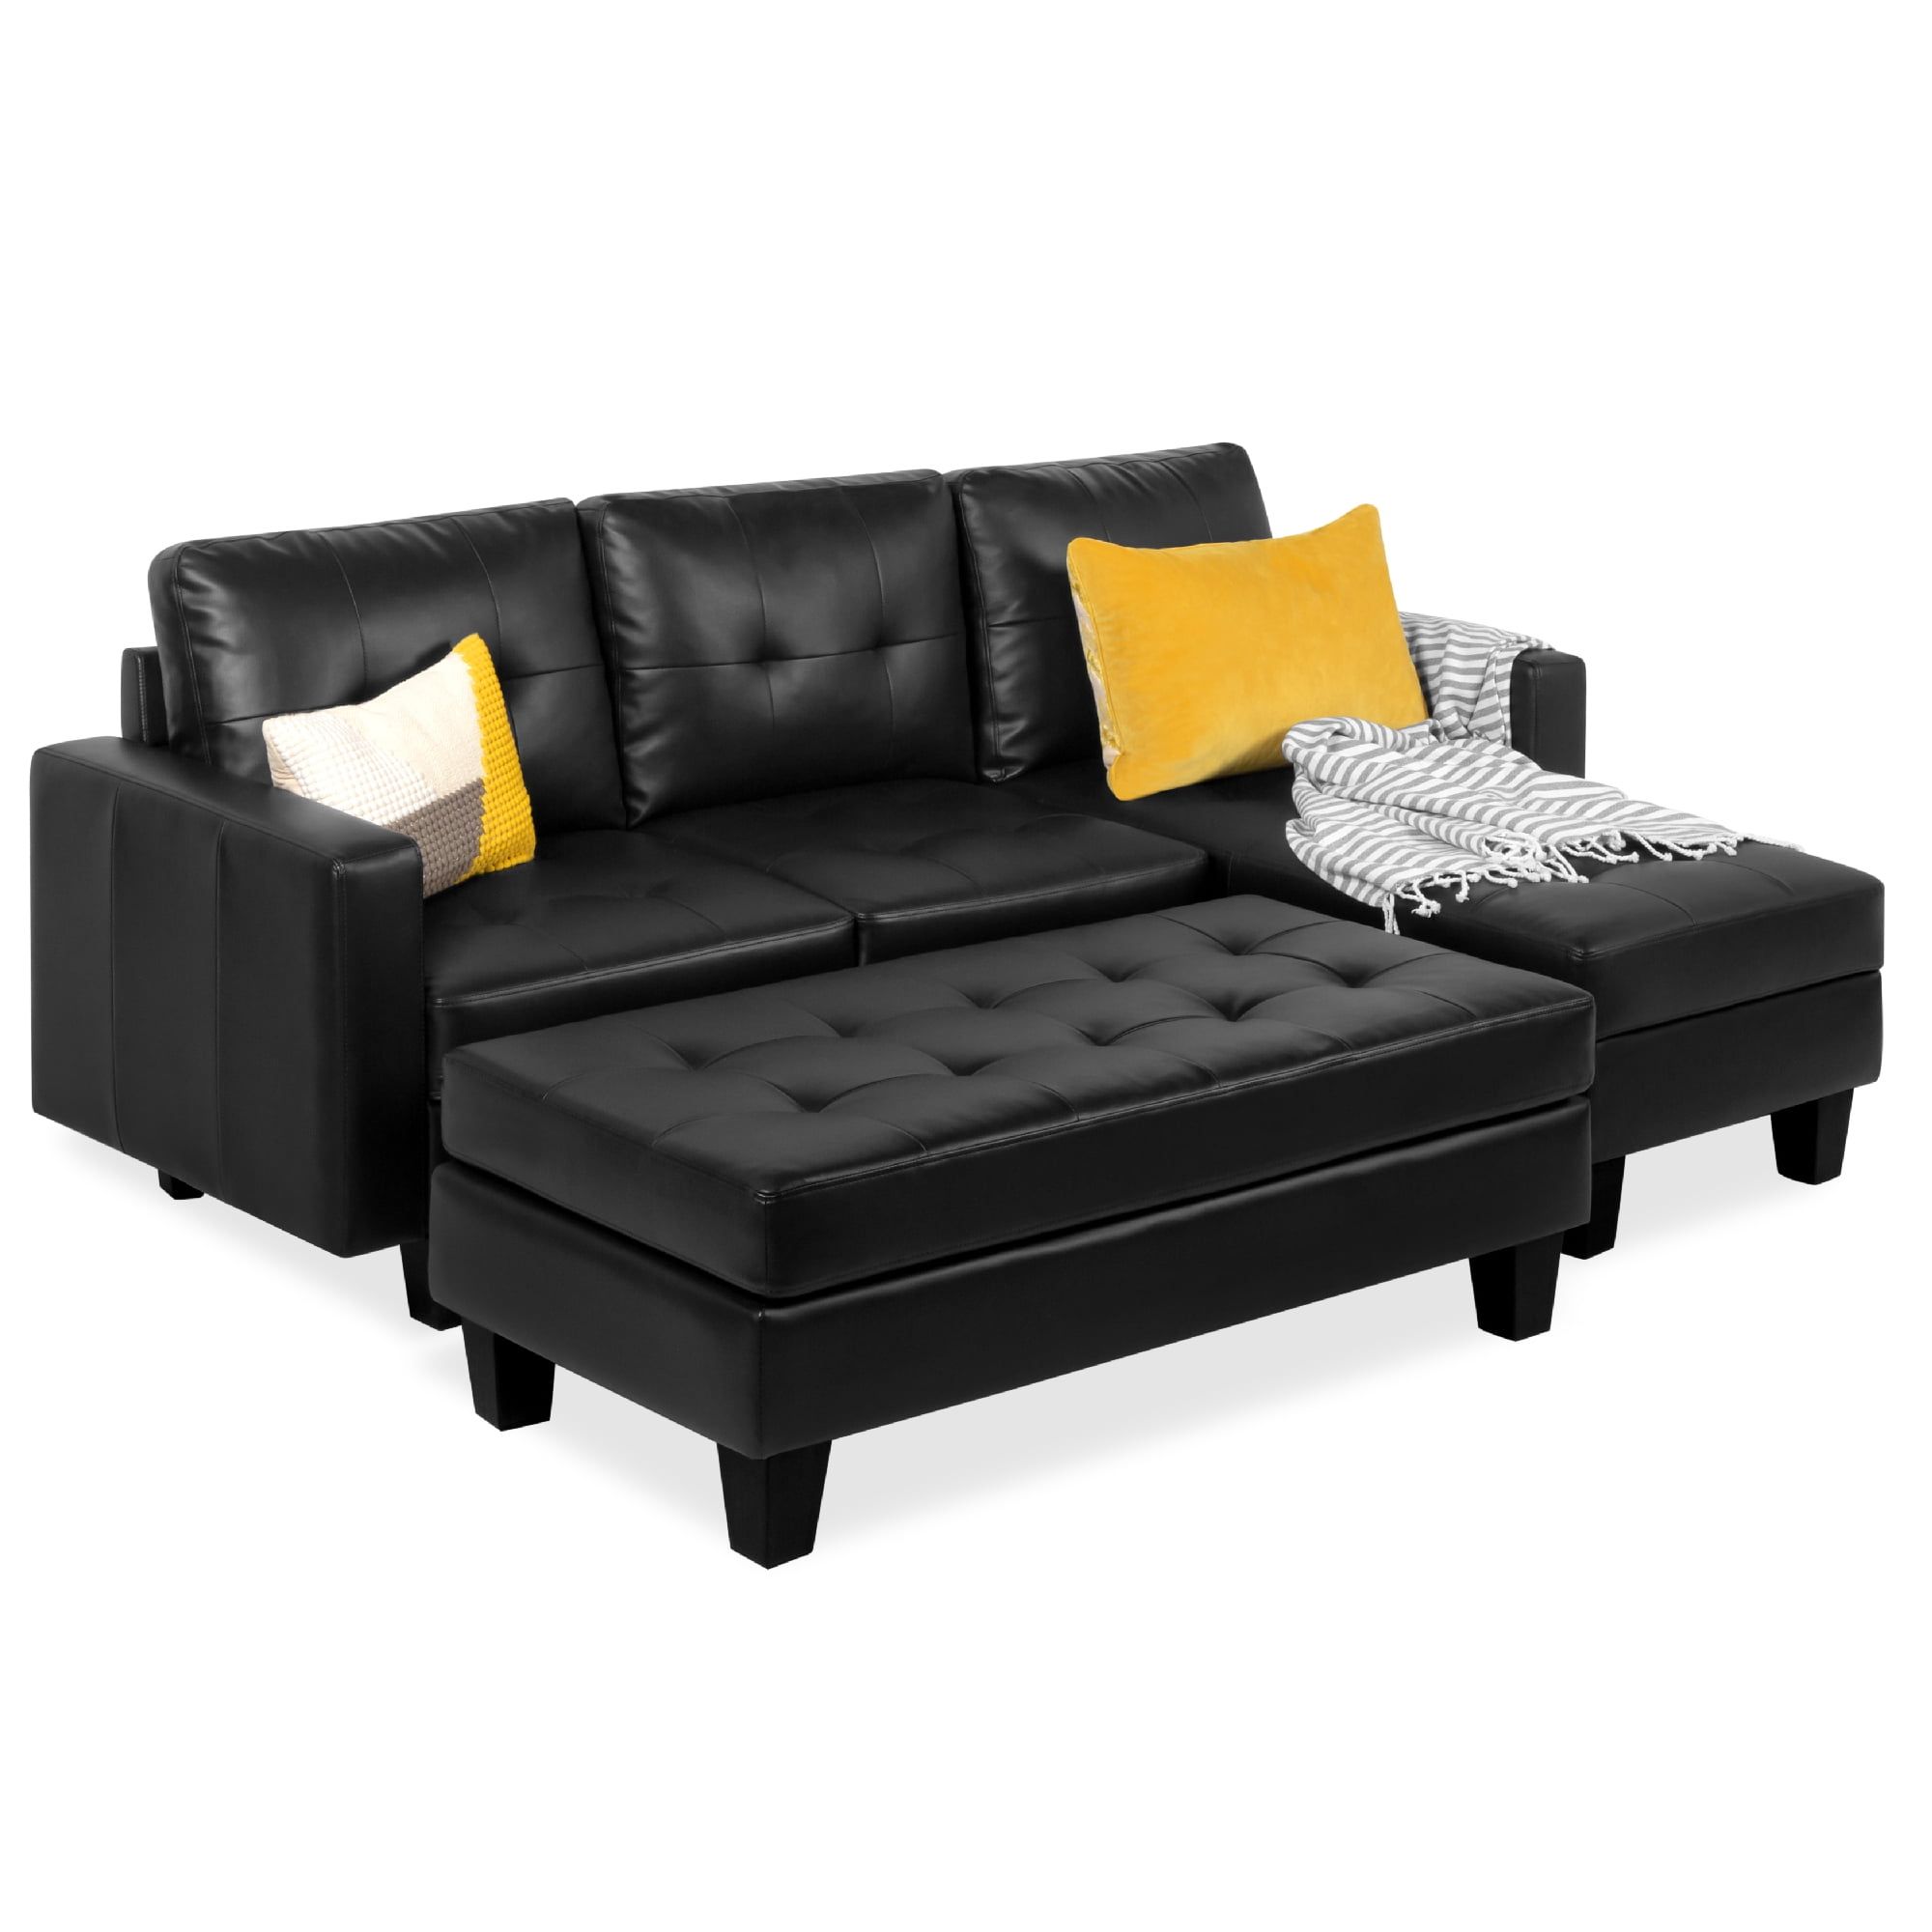 Best Choice Products 3 Seat L Shape Tufted Faux Leather Sectional Sofa Couch  Set W/ Chaise Lounge, Ottoman Bench – Black – Walmart With 3 Seat L Shaped Sofas In Black (View 2 of 15)